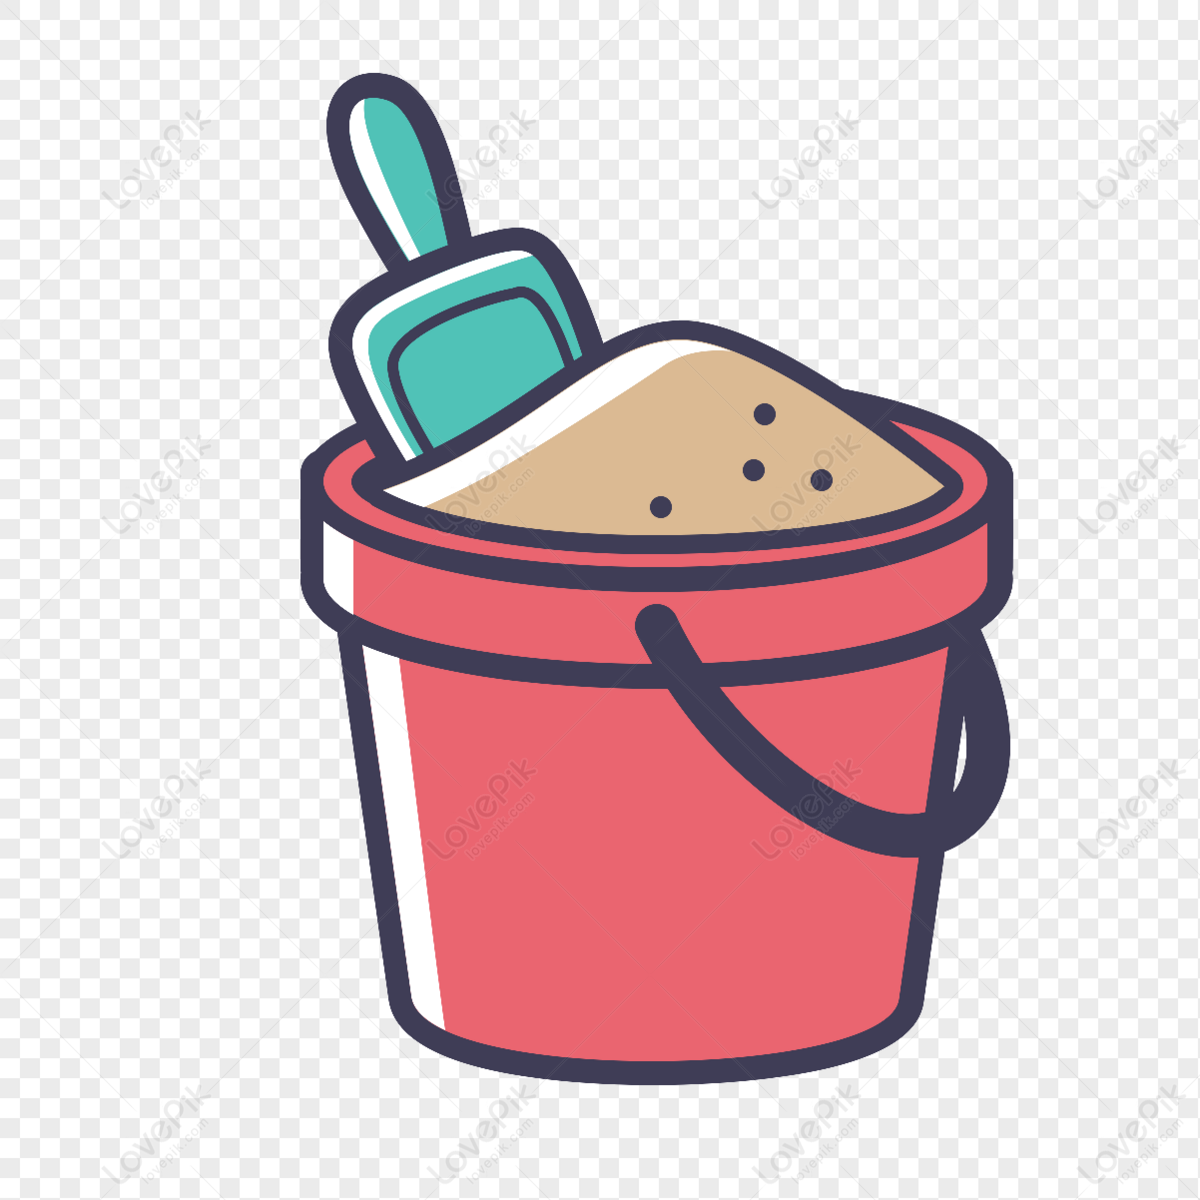 Toy Sand Bucket Icon Free Vector Illustration Material PNG White  Transparent And Clipart Image For Free Download - Lovepik | 401315292